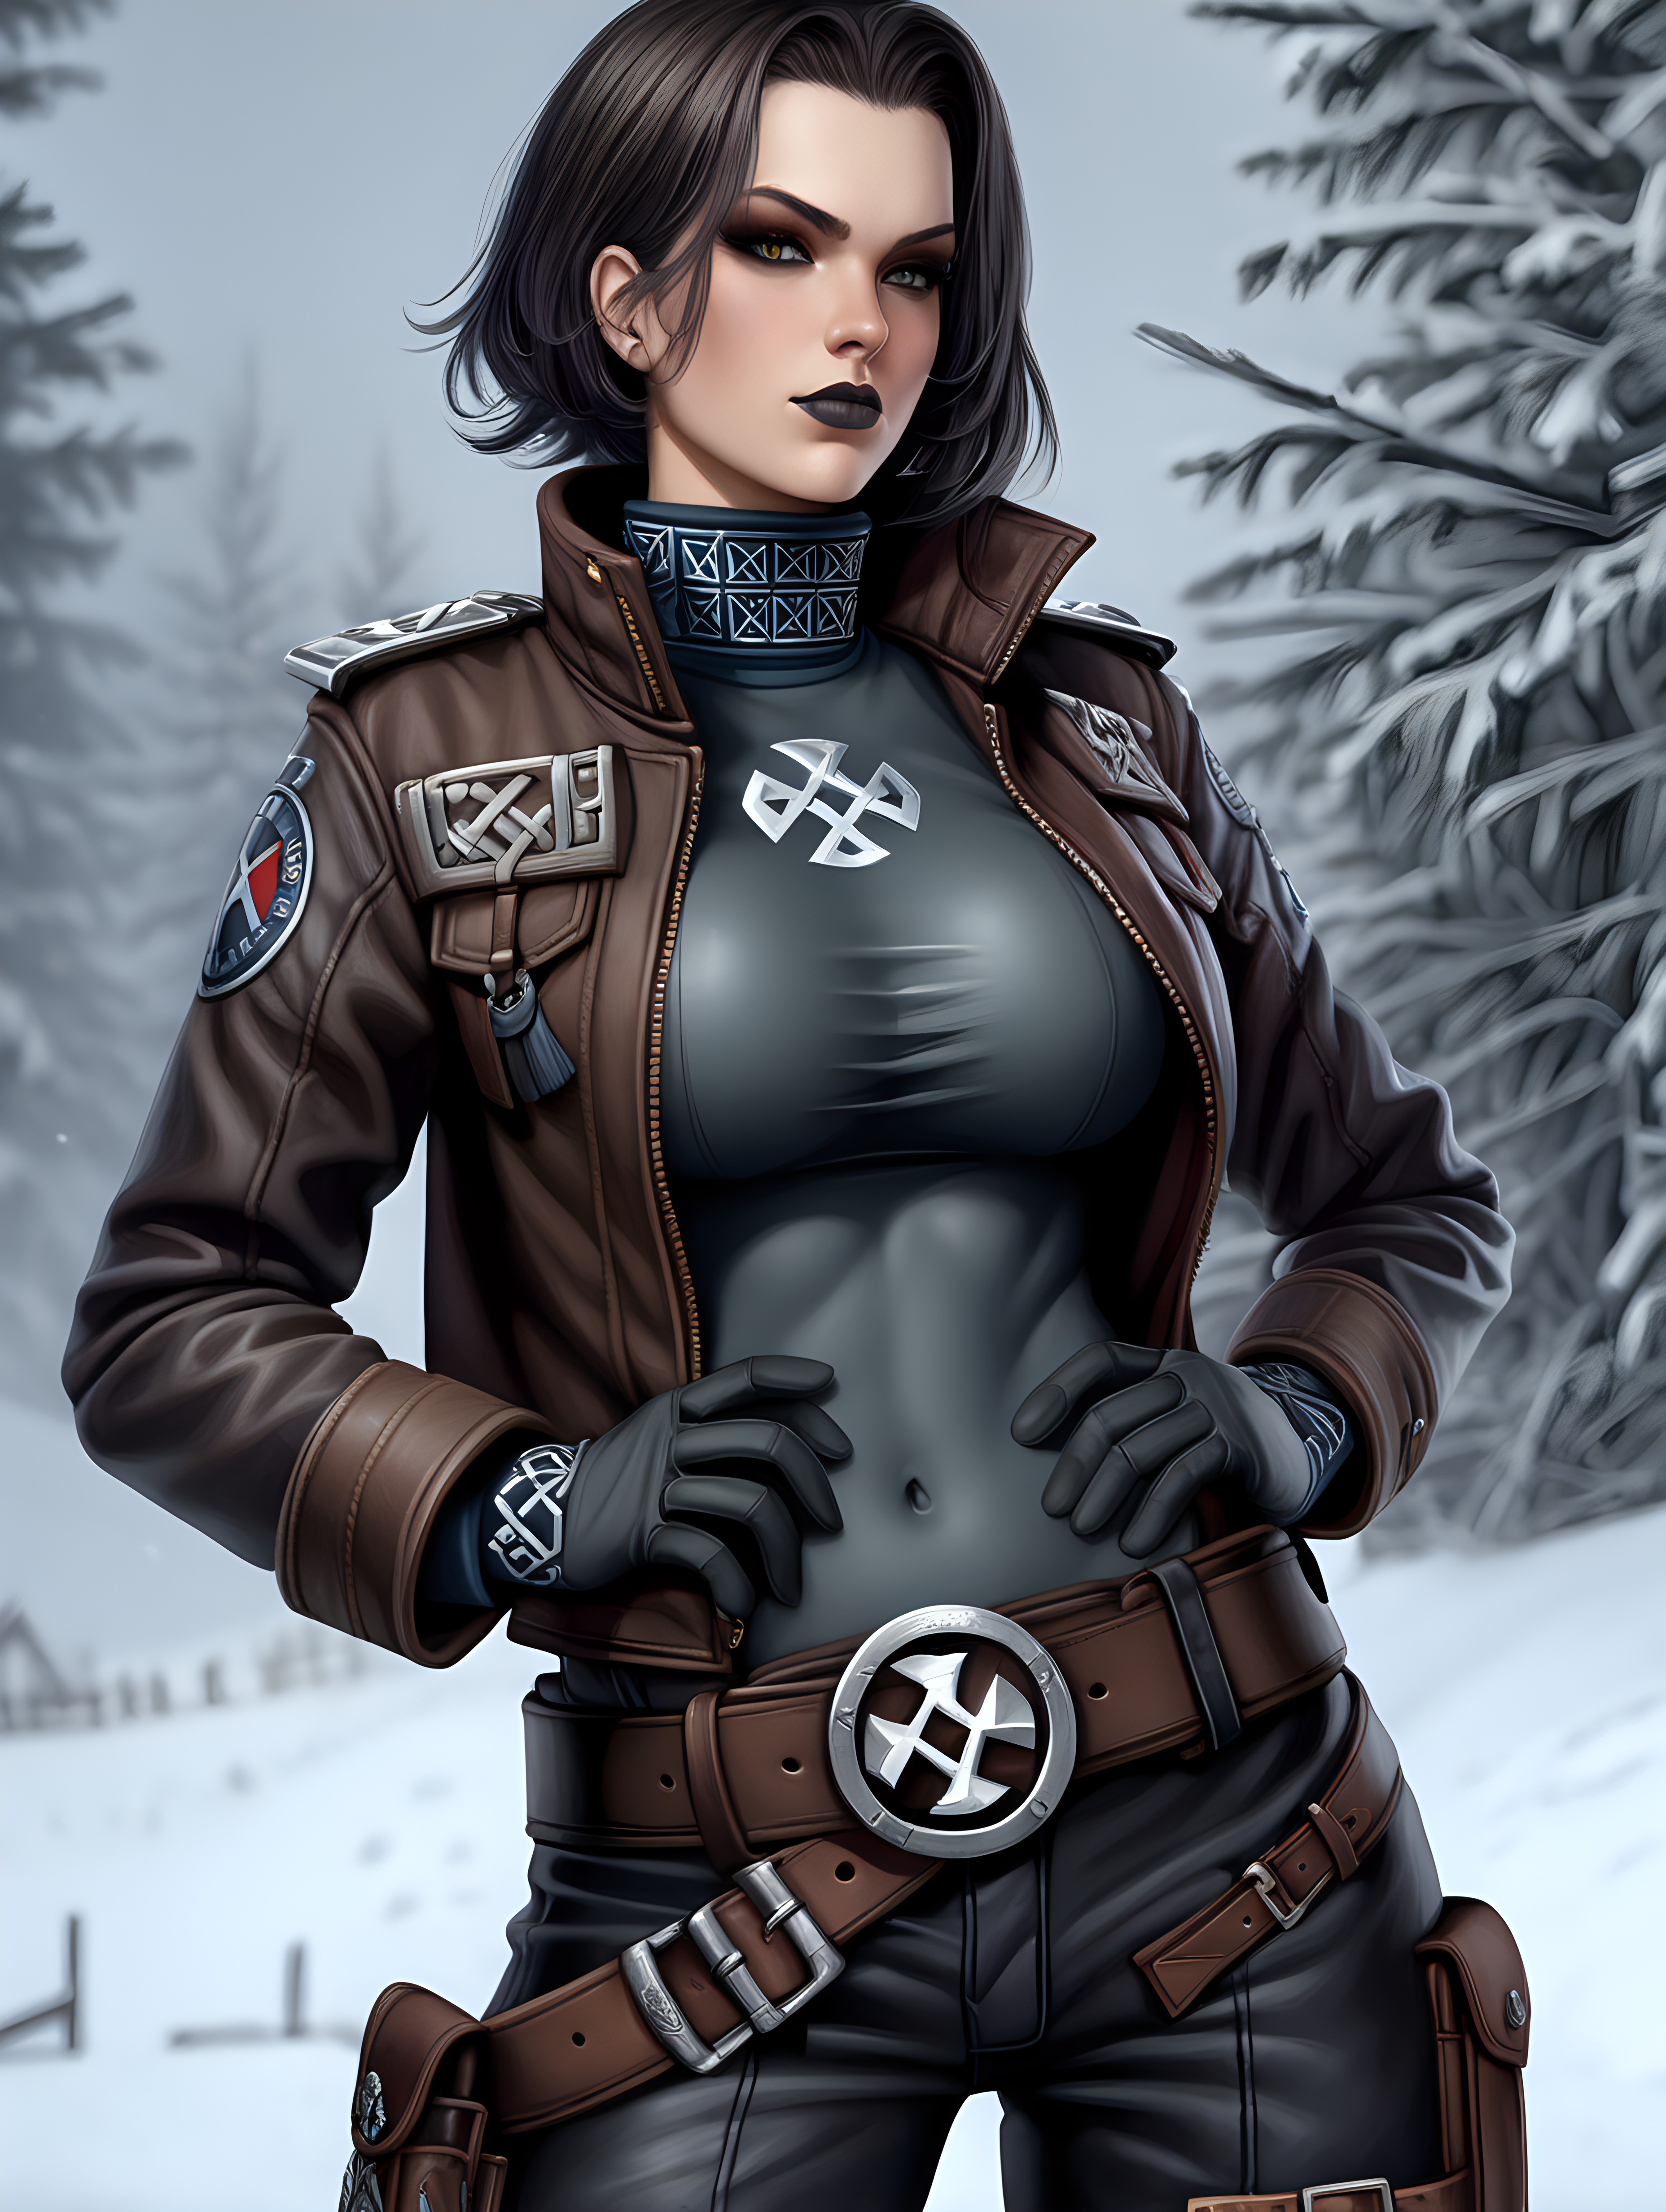 Warhammer 40K young very busty Commissar woman She